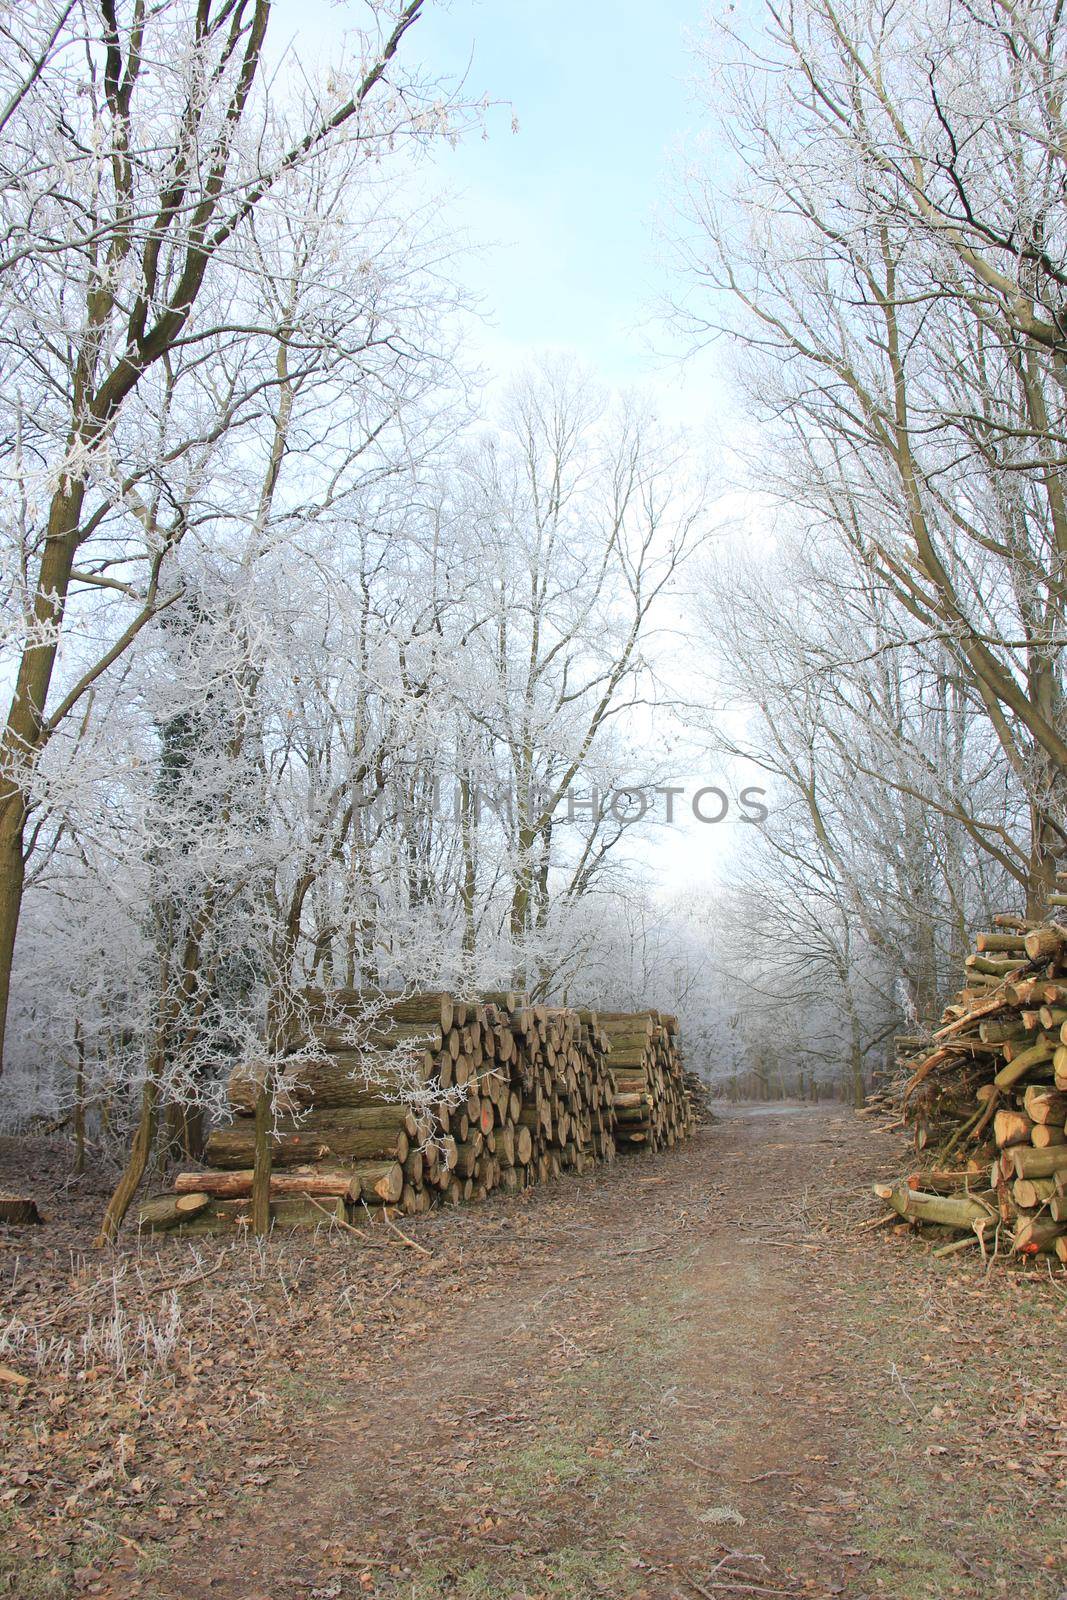 Big piles of chopped fuel wood in a winter forest